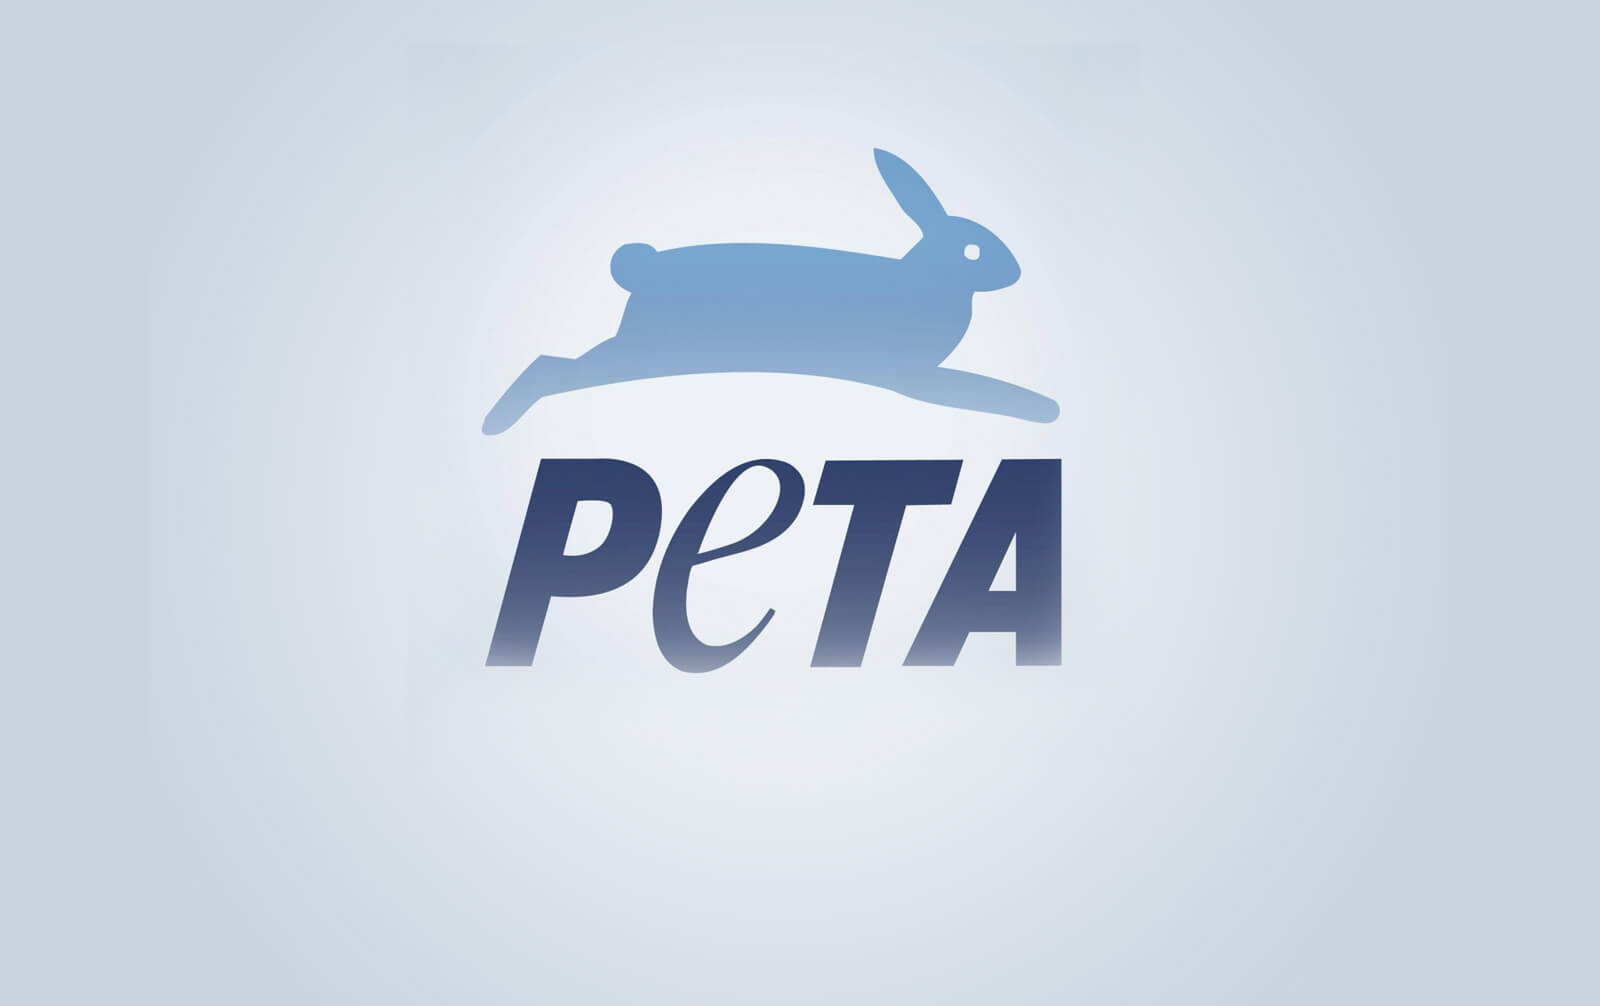 peta facebook placeholder new Wool-Filled Fiber Festival to Be Confronted With New PETA Campaign